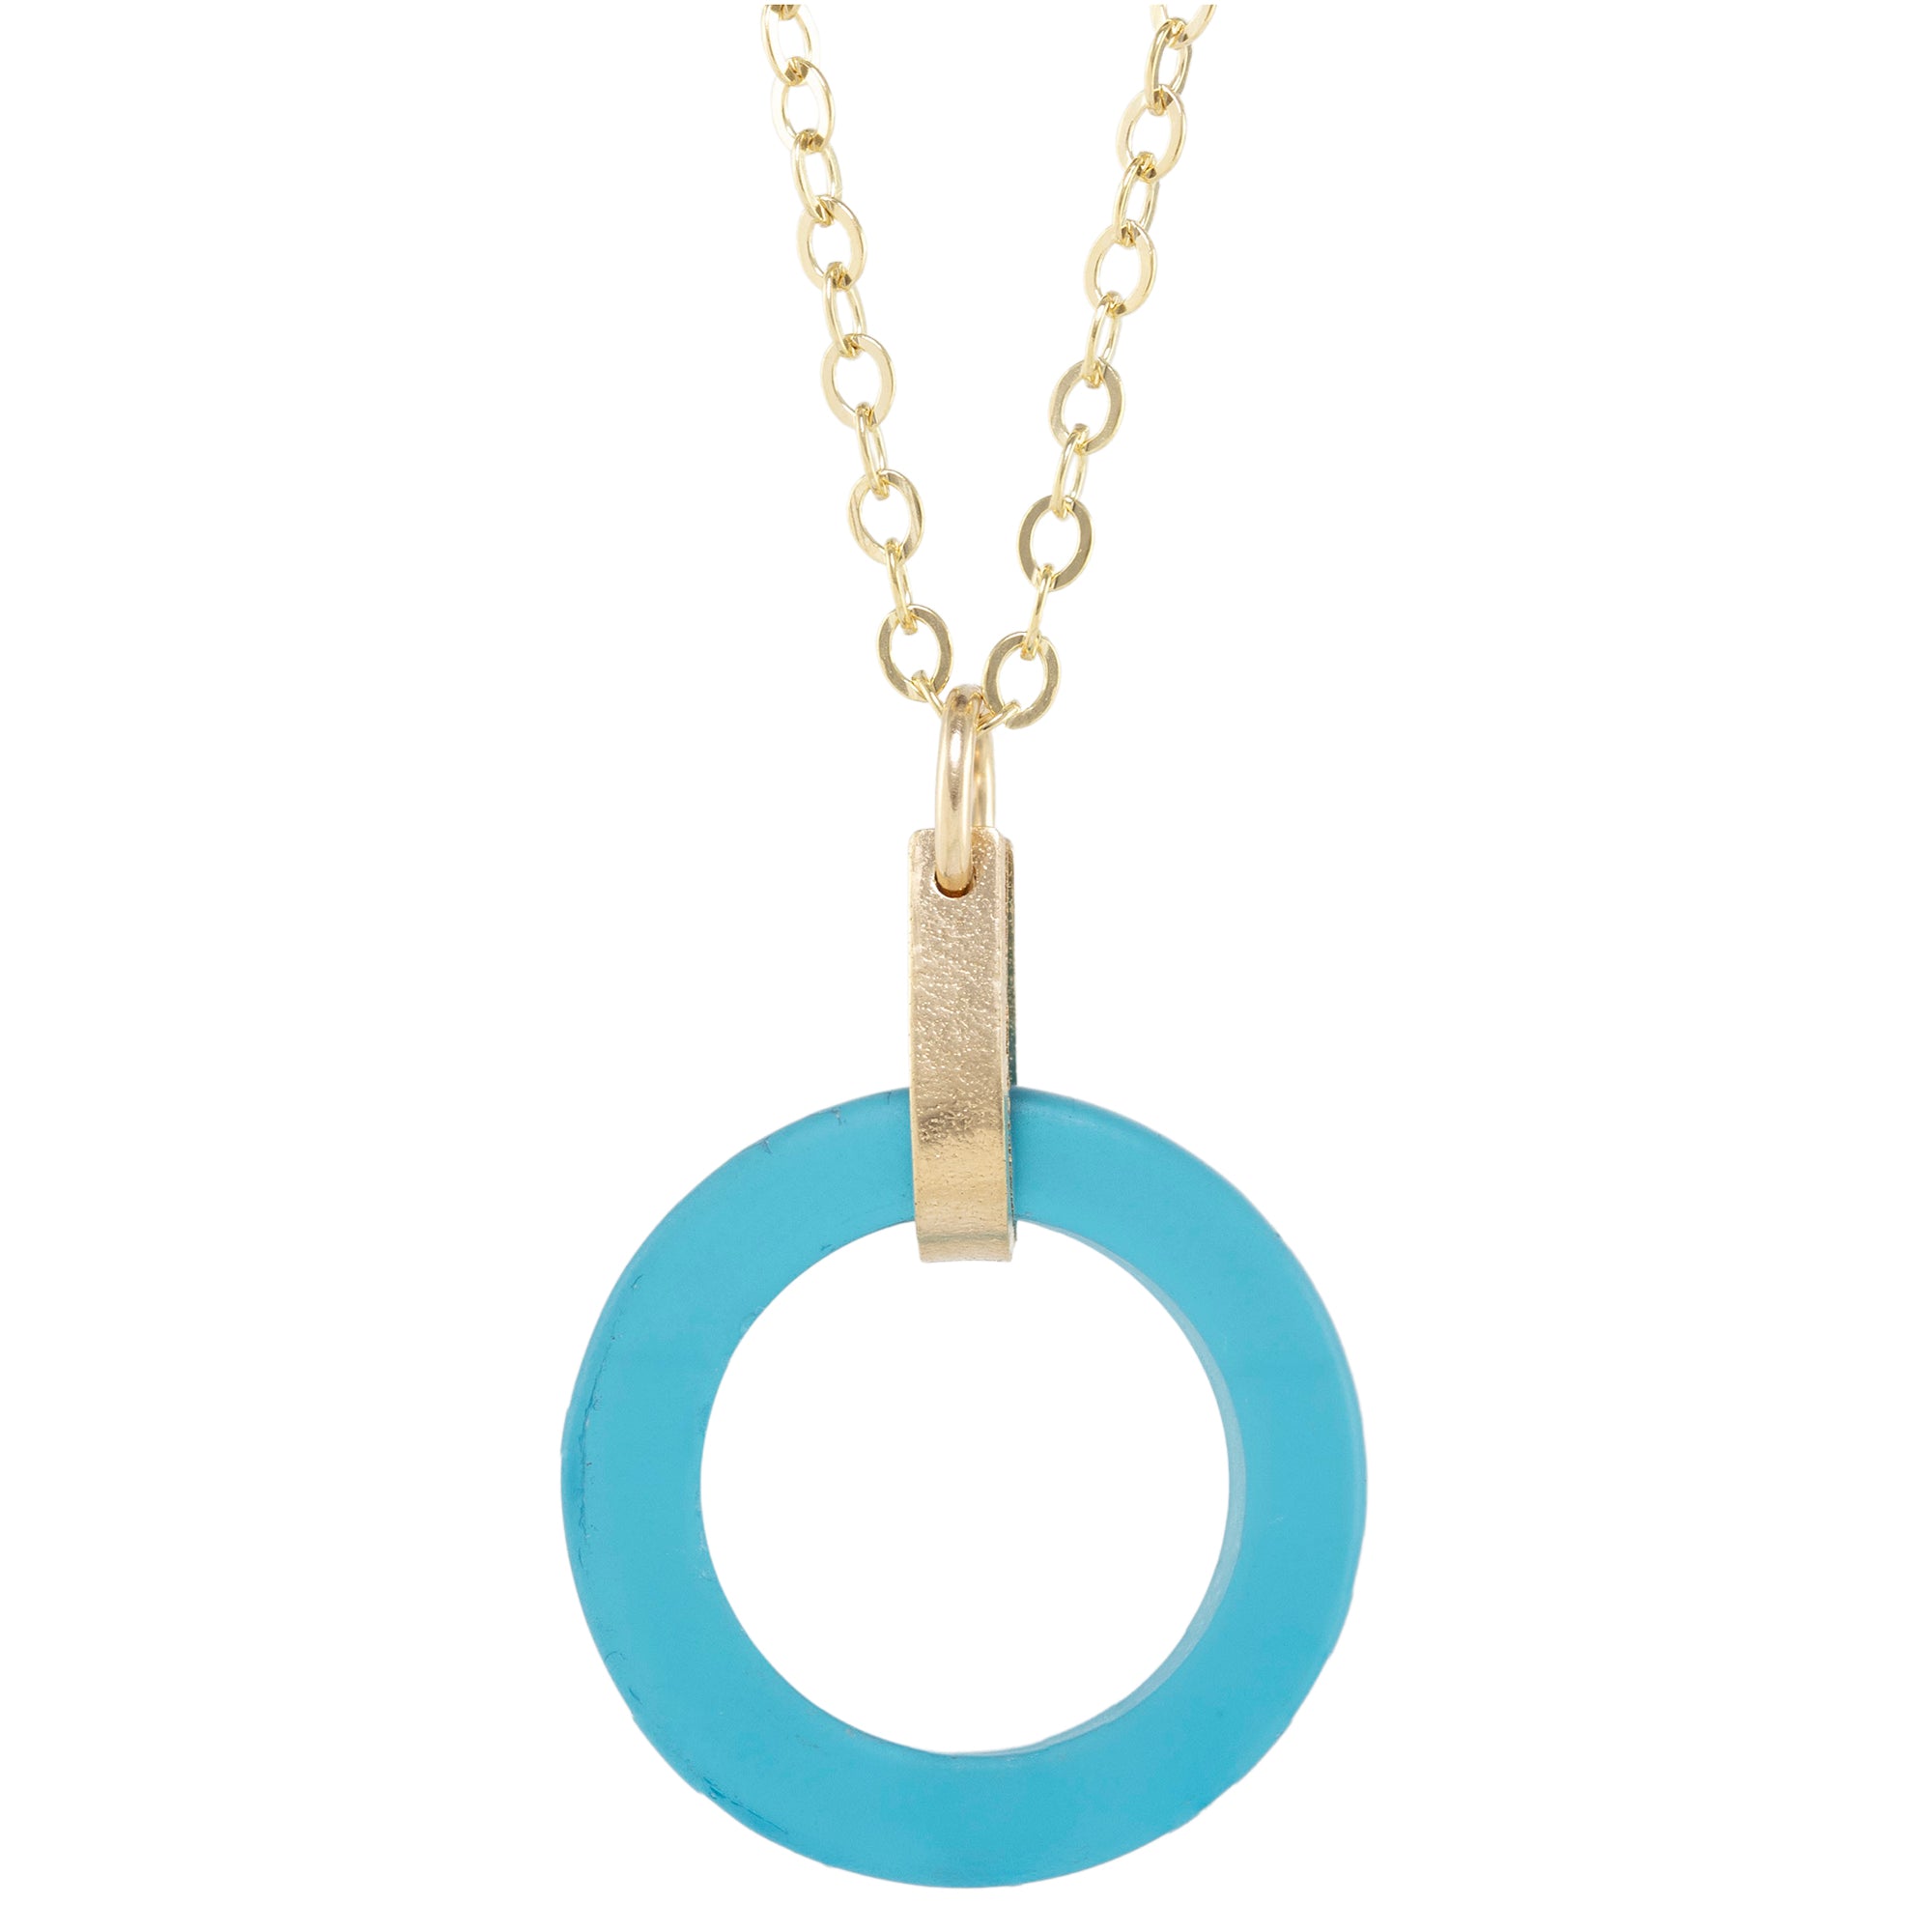 Teal Peacock Blue Round Recycled Glass Open Circle and 14K Gold Fill Strap Style Pendant Necklace